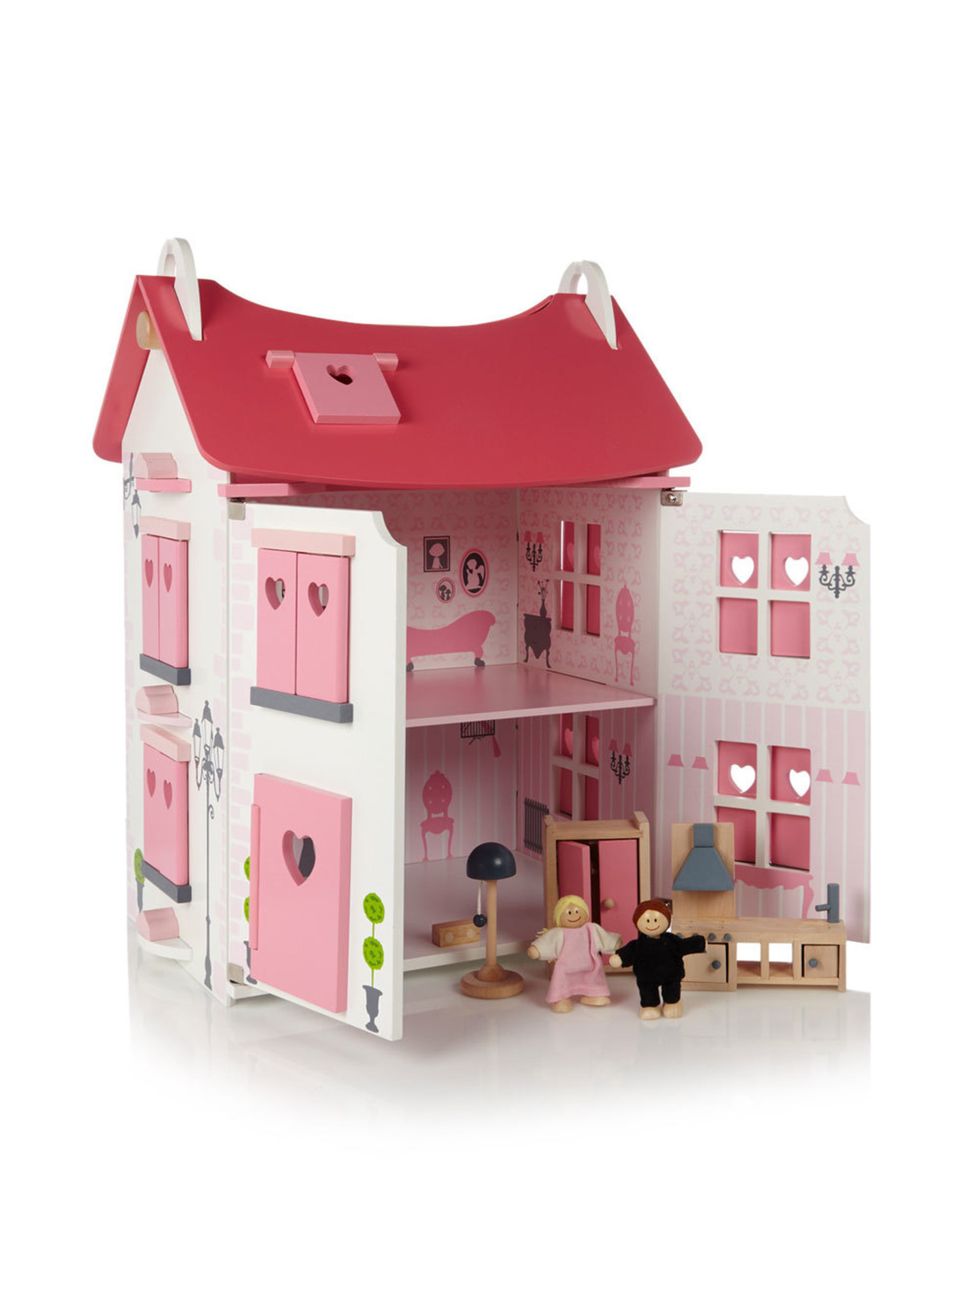 Product, Pink, House, Magenta, Home, Roof, Dollhouse, Dollhouse accessory, Toy, Building sets, 